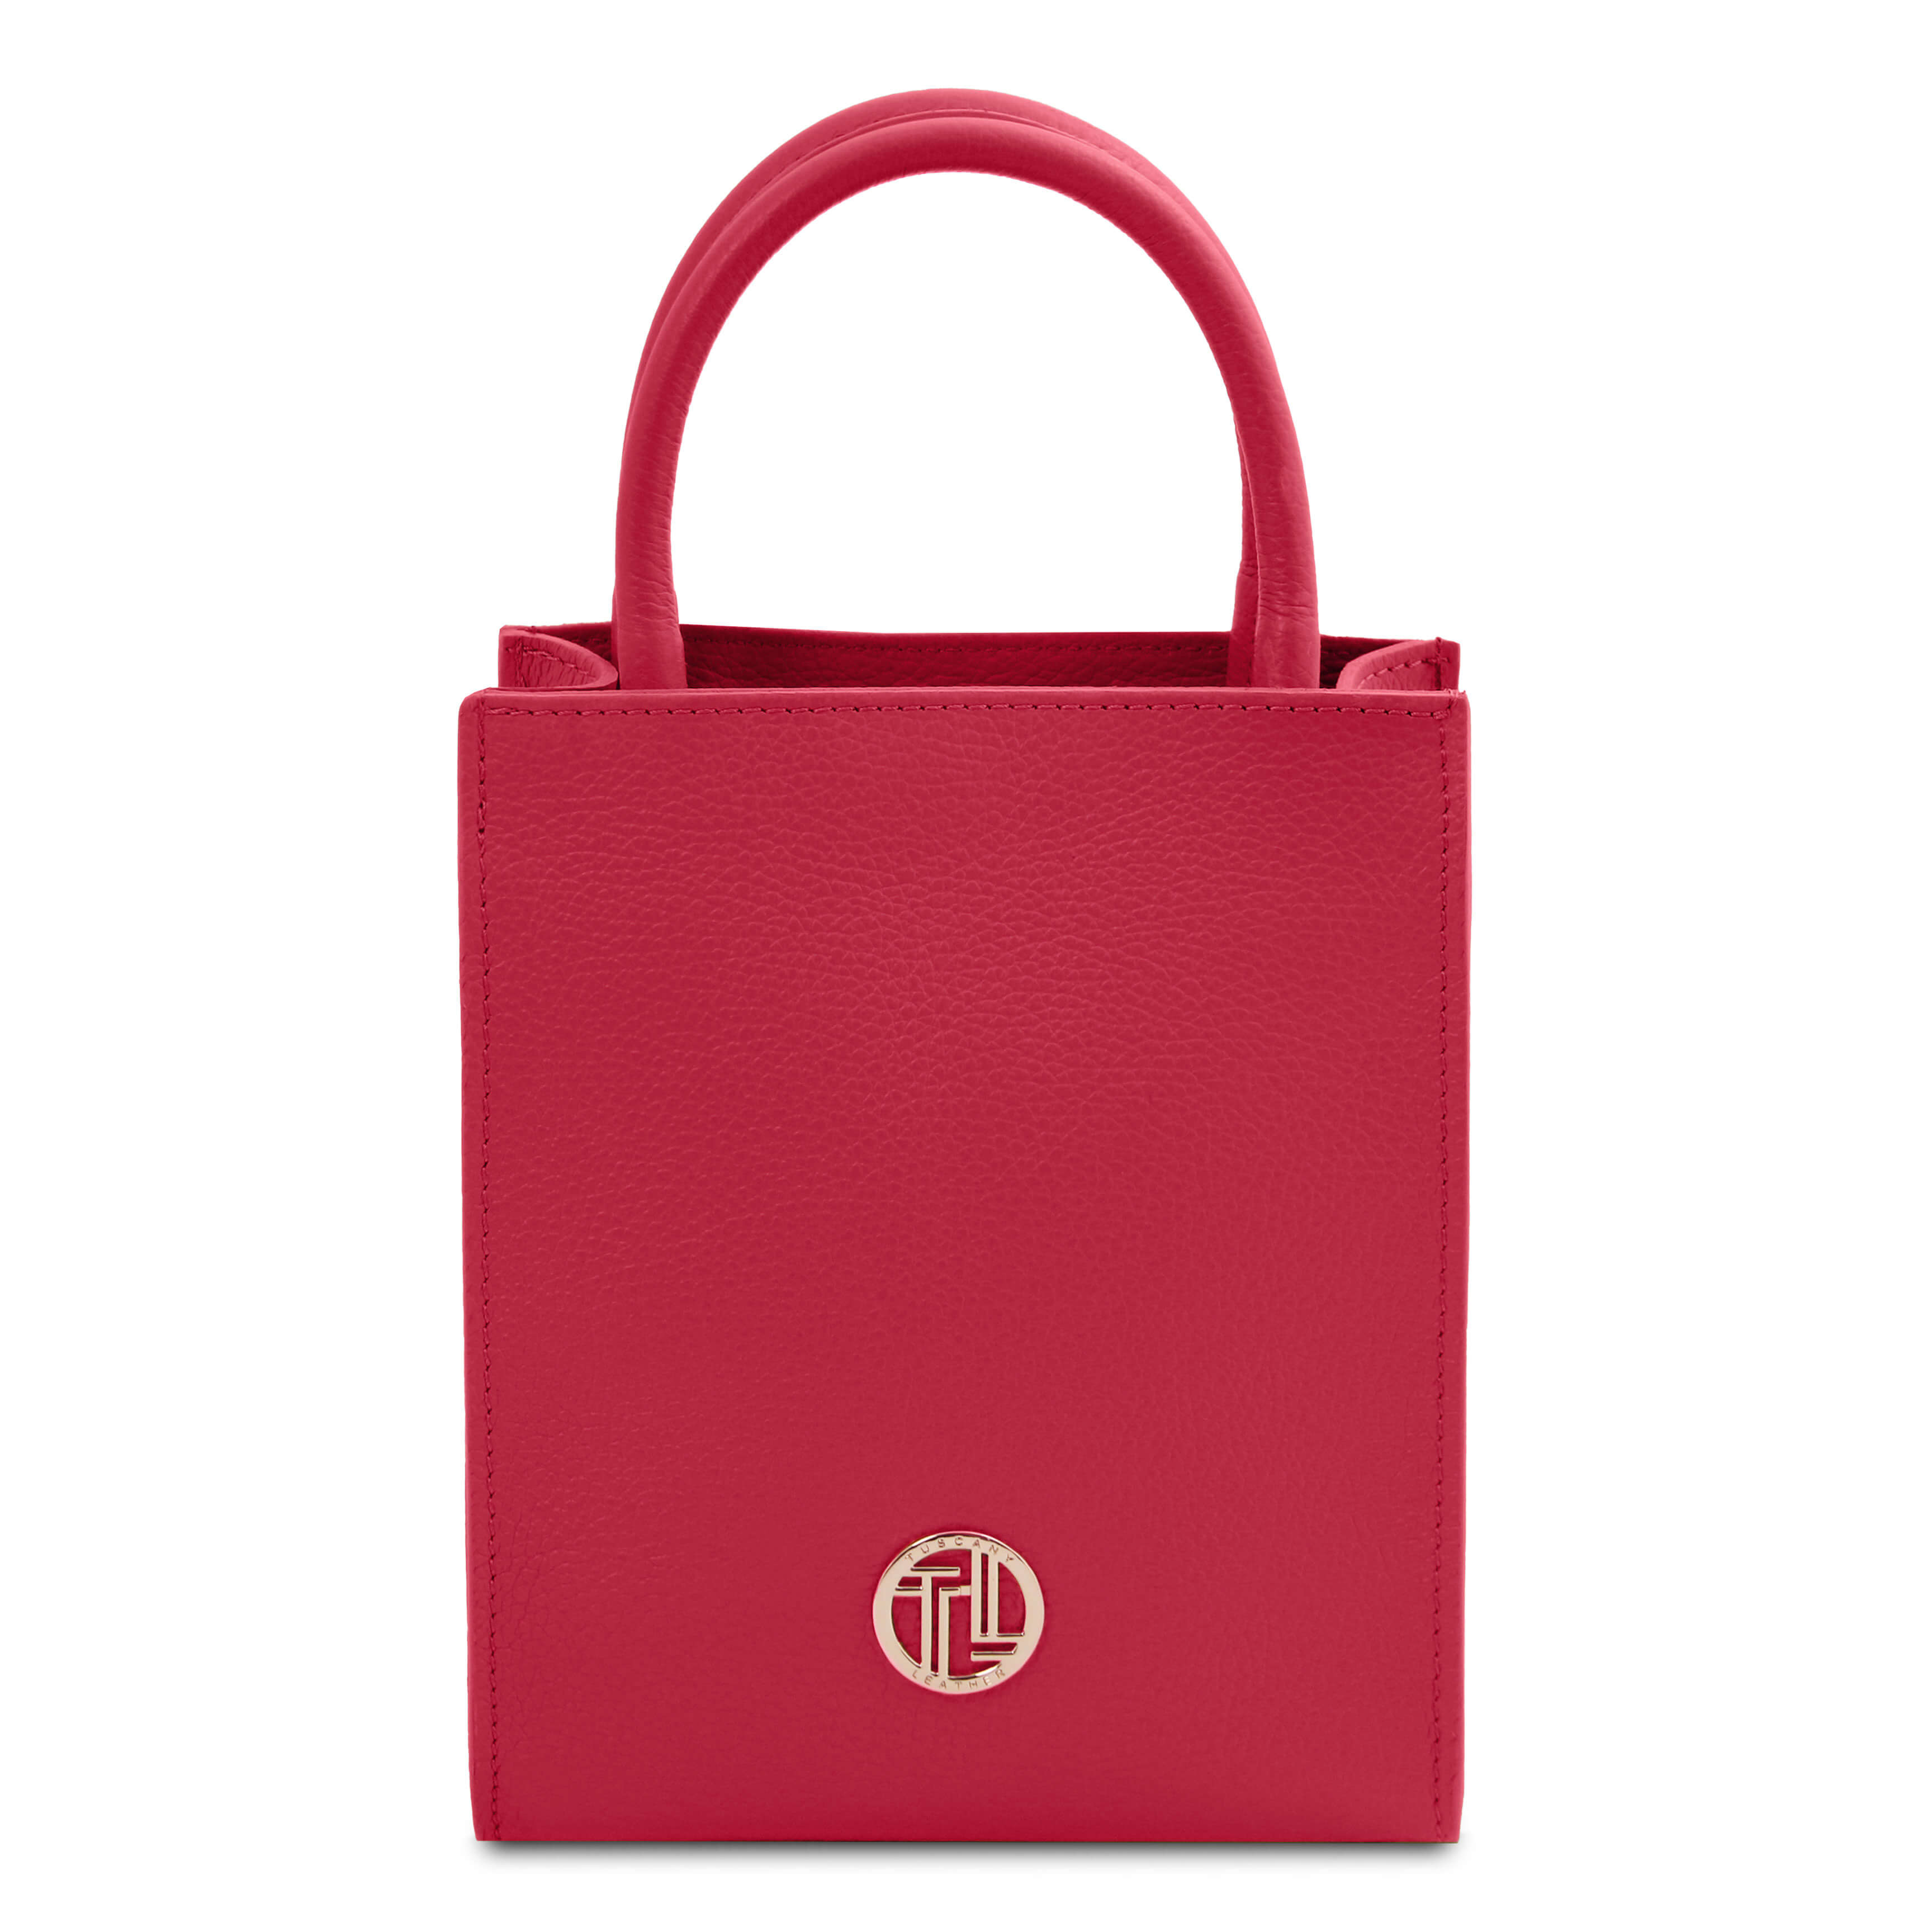 Tuscany Leather handtas KATE voor dames TL142366 roze 